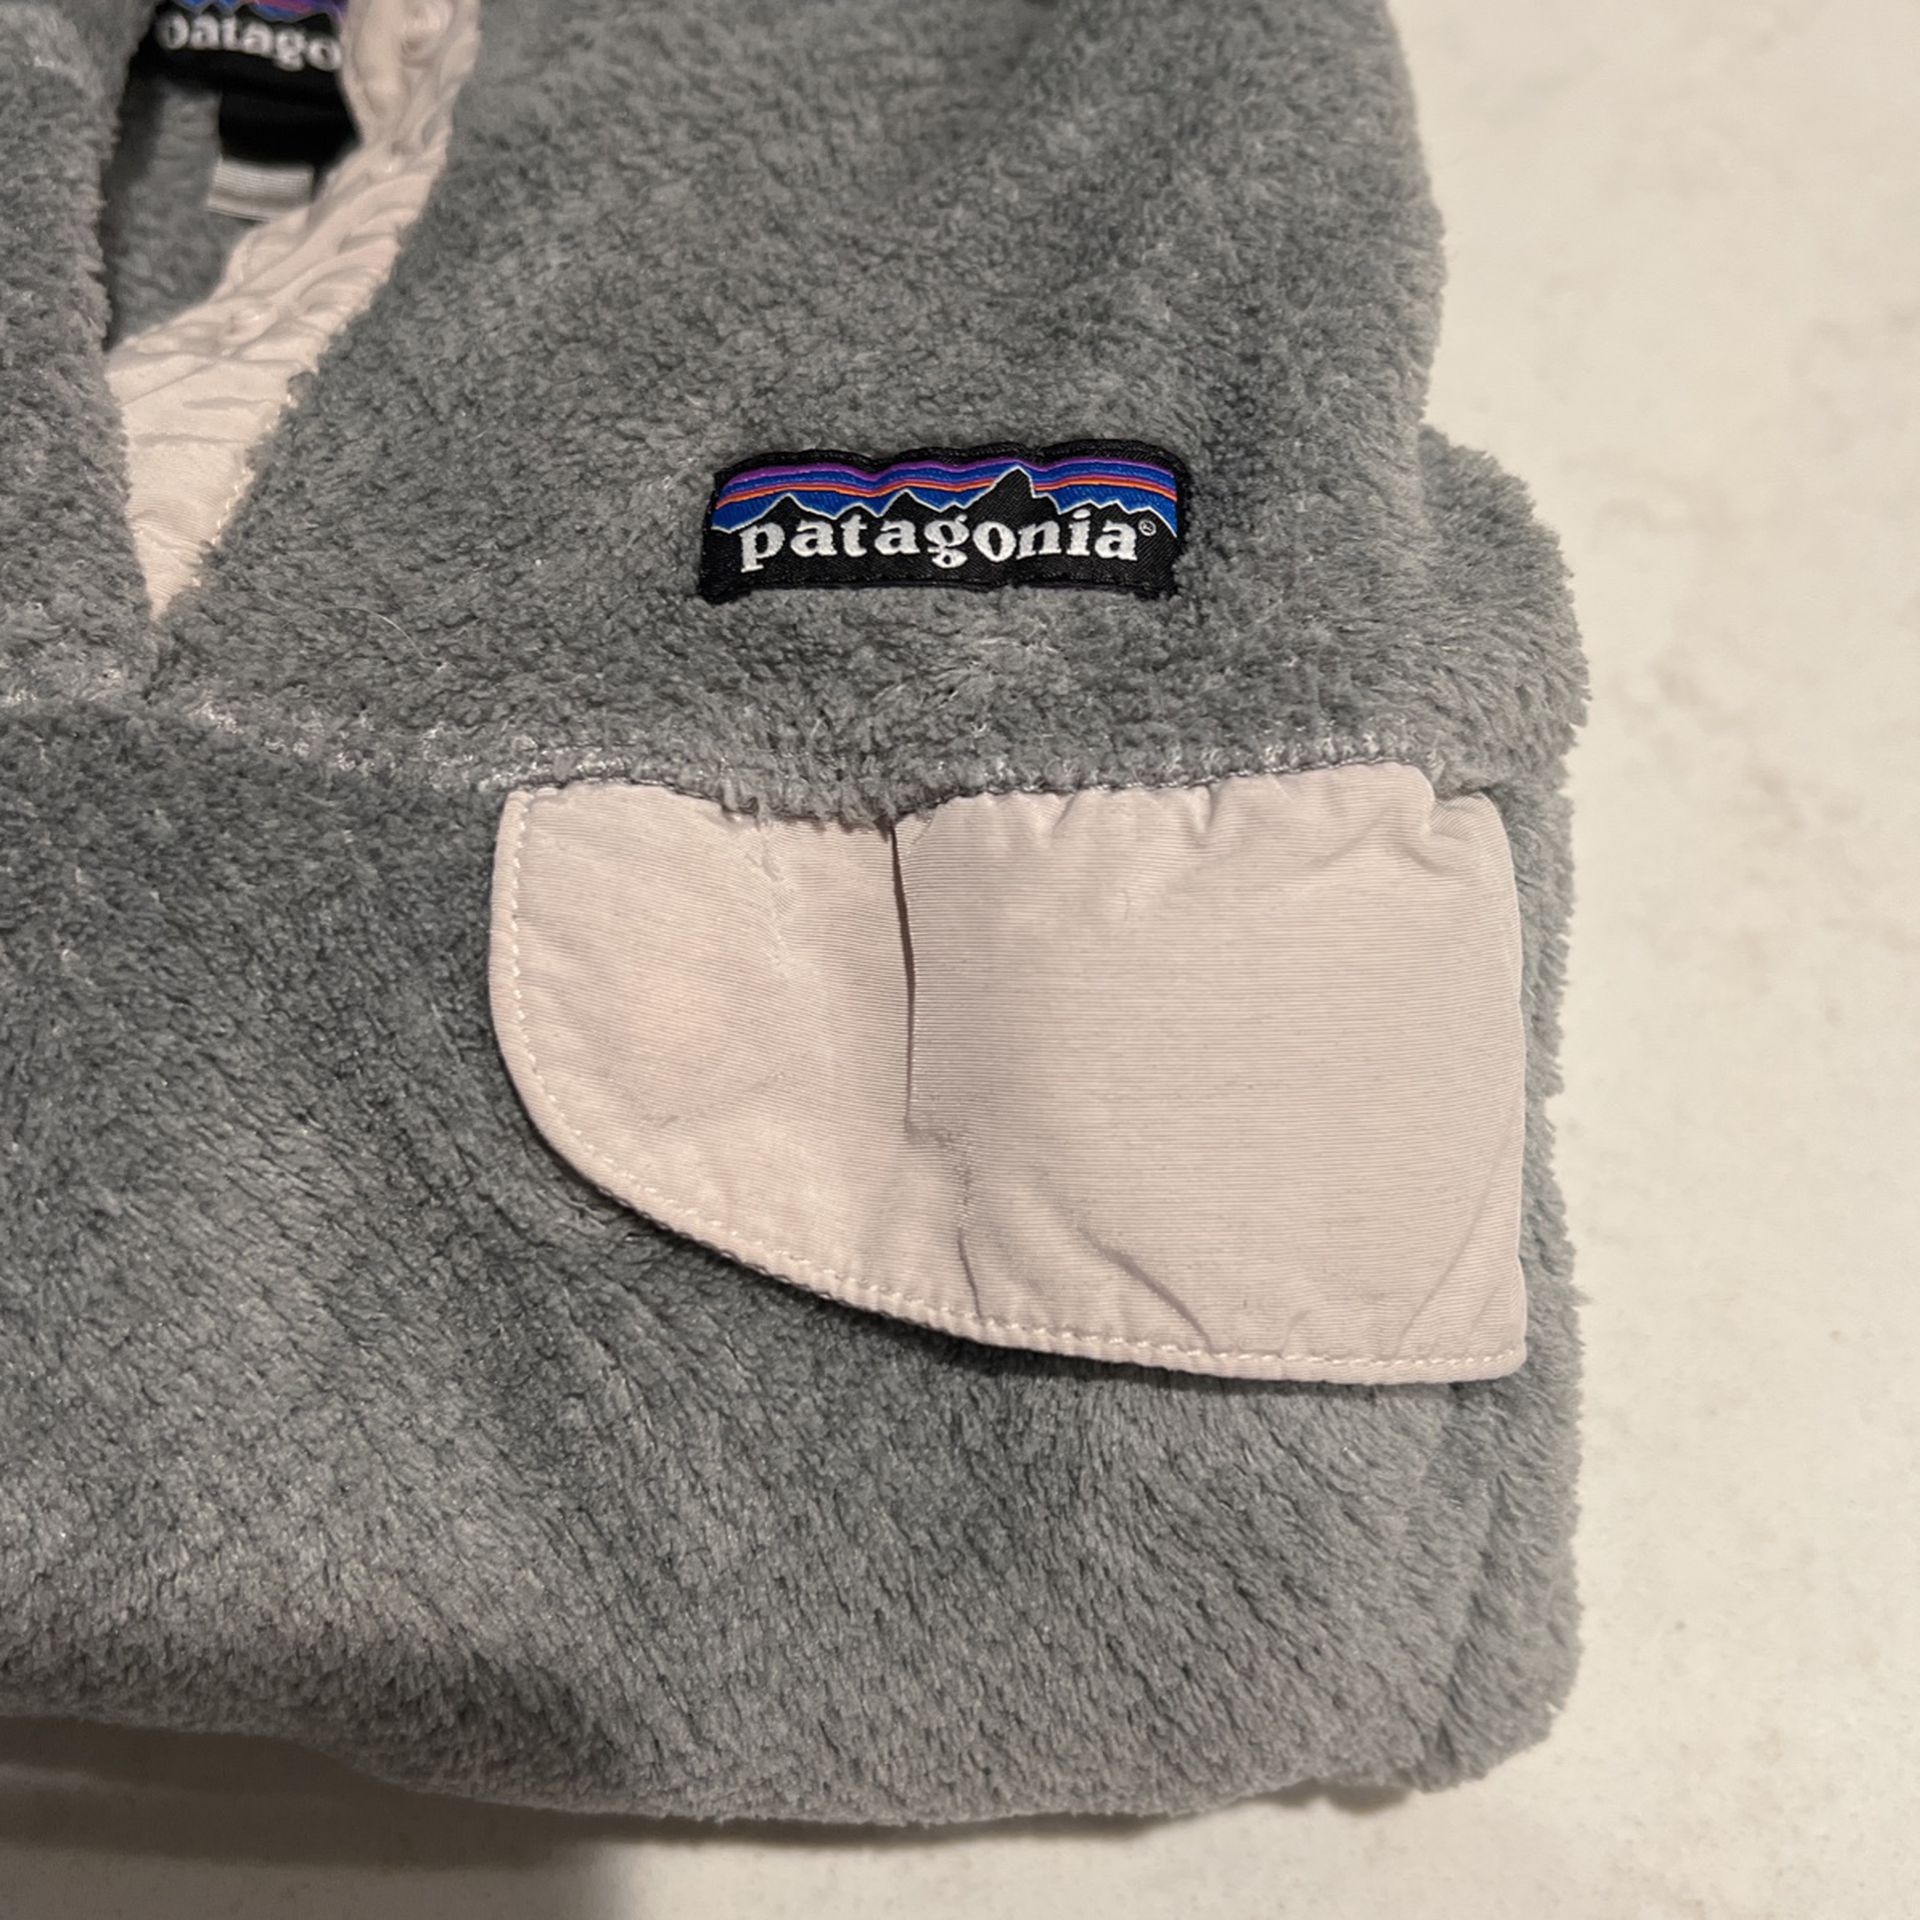 Patagonia: Women’s Classic grey, fleece pullover, Size M